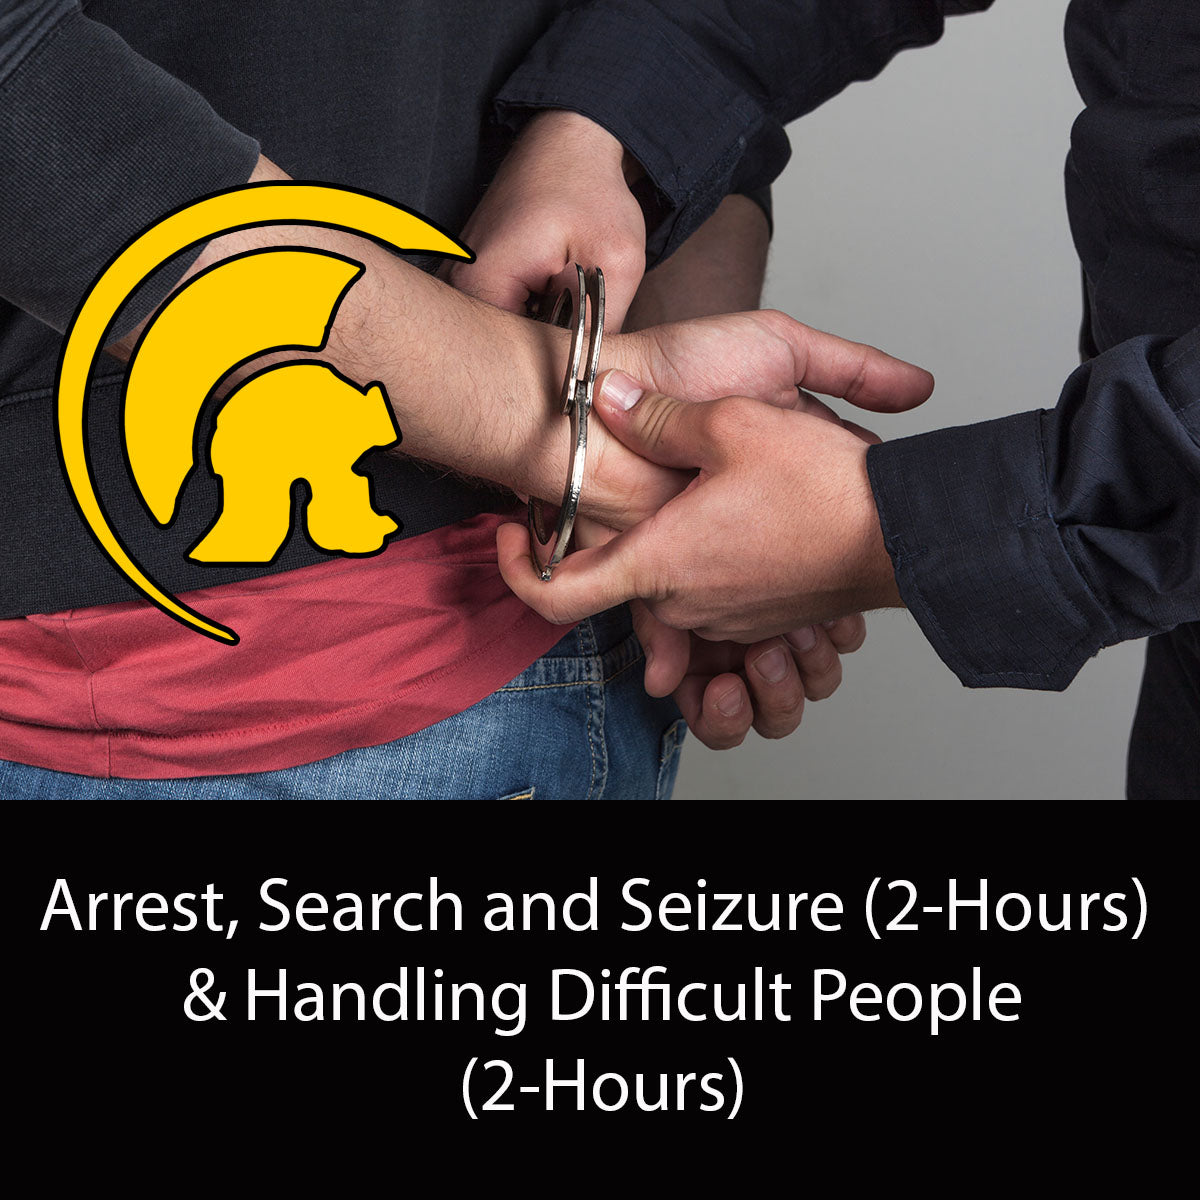 CA AB2880 Mandatory: Arrest, Search and Seizure (2-Hours) and Handling Difficult People (2-Hours)